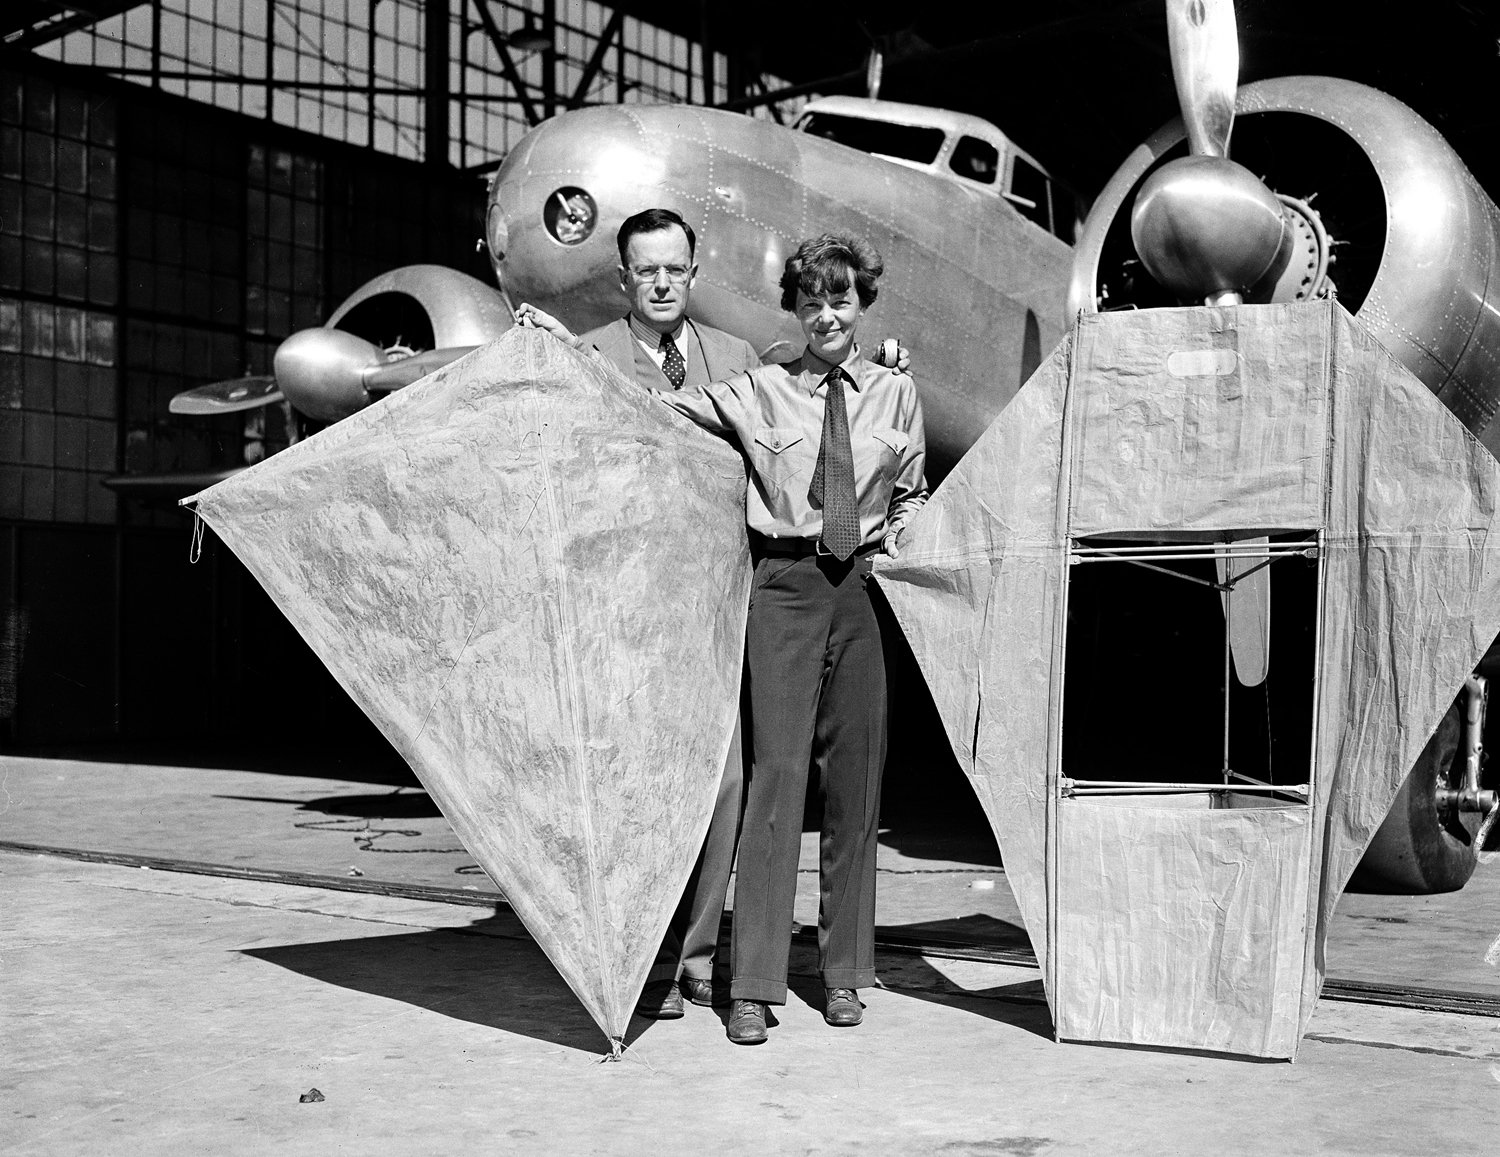  Amelia Earhart and her husband George Palmer Putnam display two kites as they stand in front of Earhart's twin-engine Lockheed Electra in Oakland, Calif., on March 6, 1937, ten days prior to her projected flight around the world. Earhart plans to fl